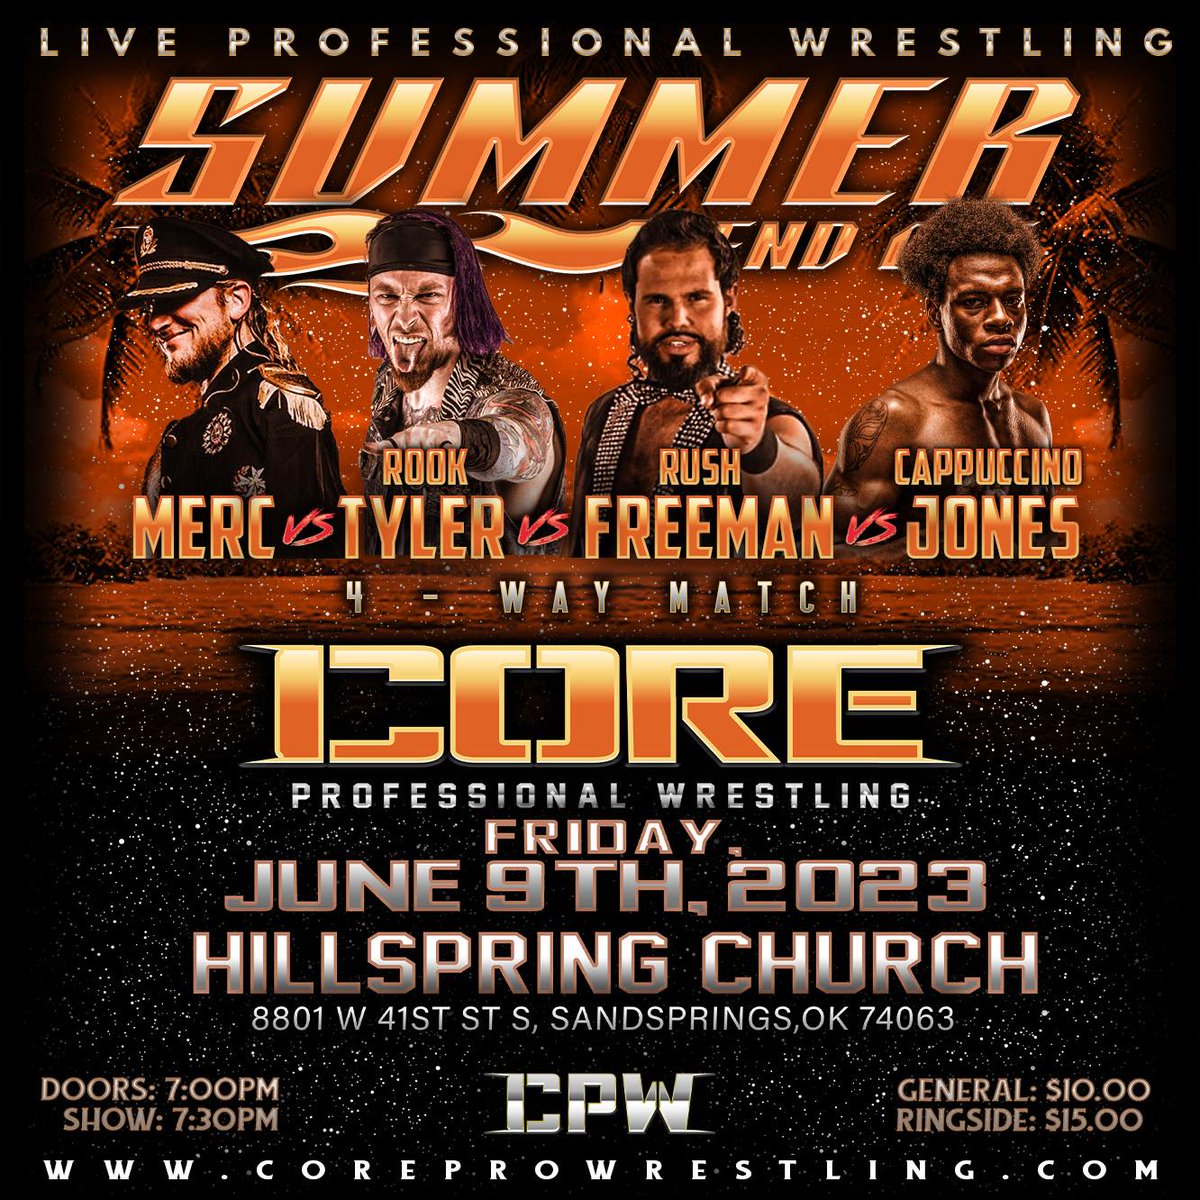 Match announcement! 
MERC, @RockstarRook , @coldbrewjones, and NWA's @TheFreakFreeman will battle it out in a four way match!
Go to coreprowrestling.com for tickets!